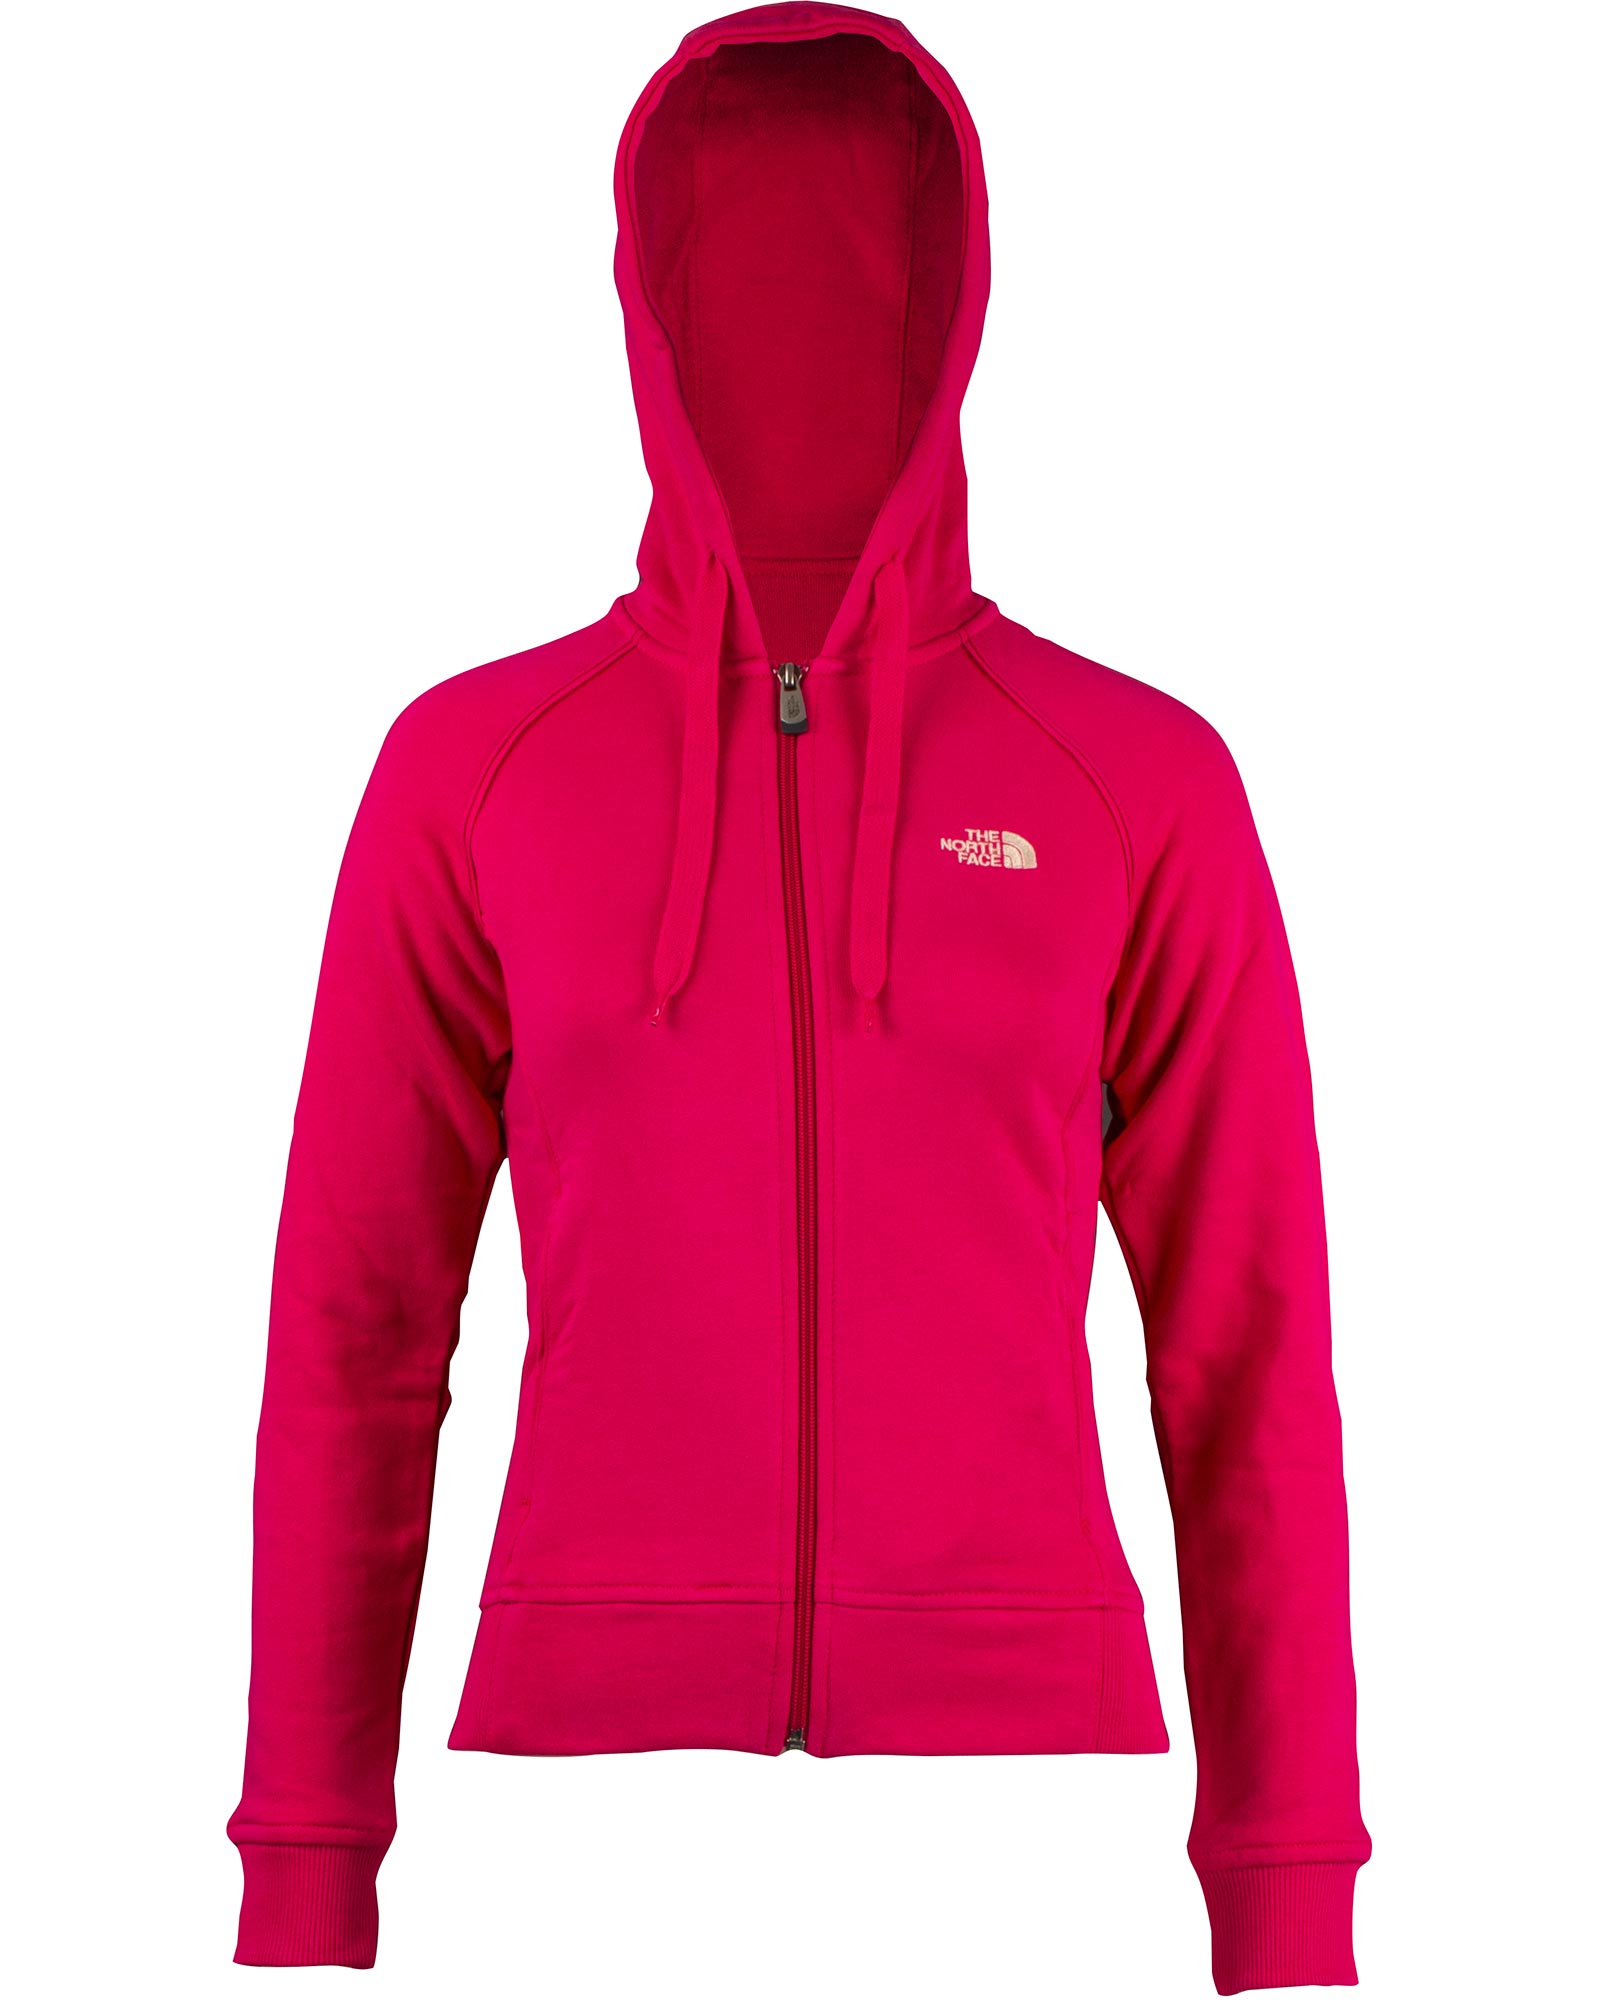 The North Face Junipet Women’s Full Zip Hoodie - Fusion Pink S